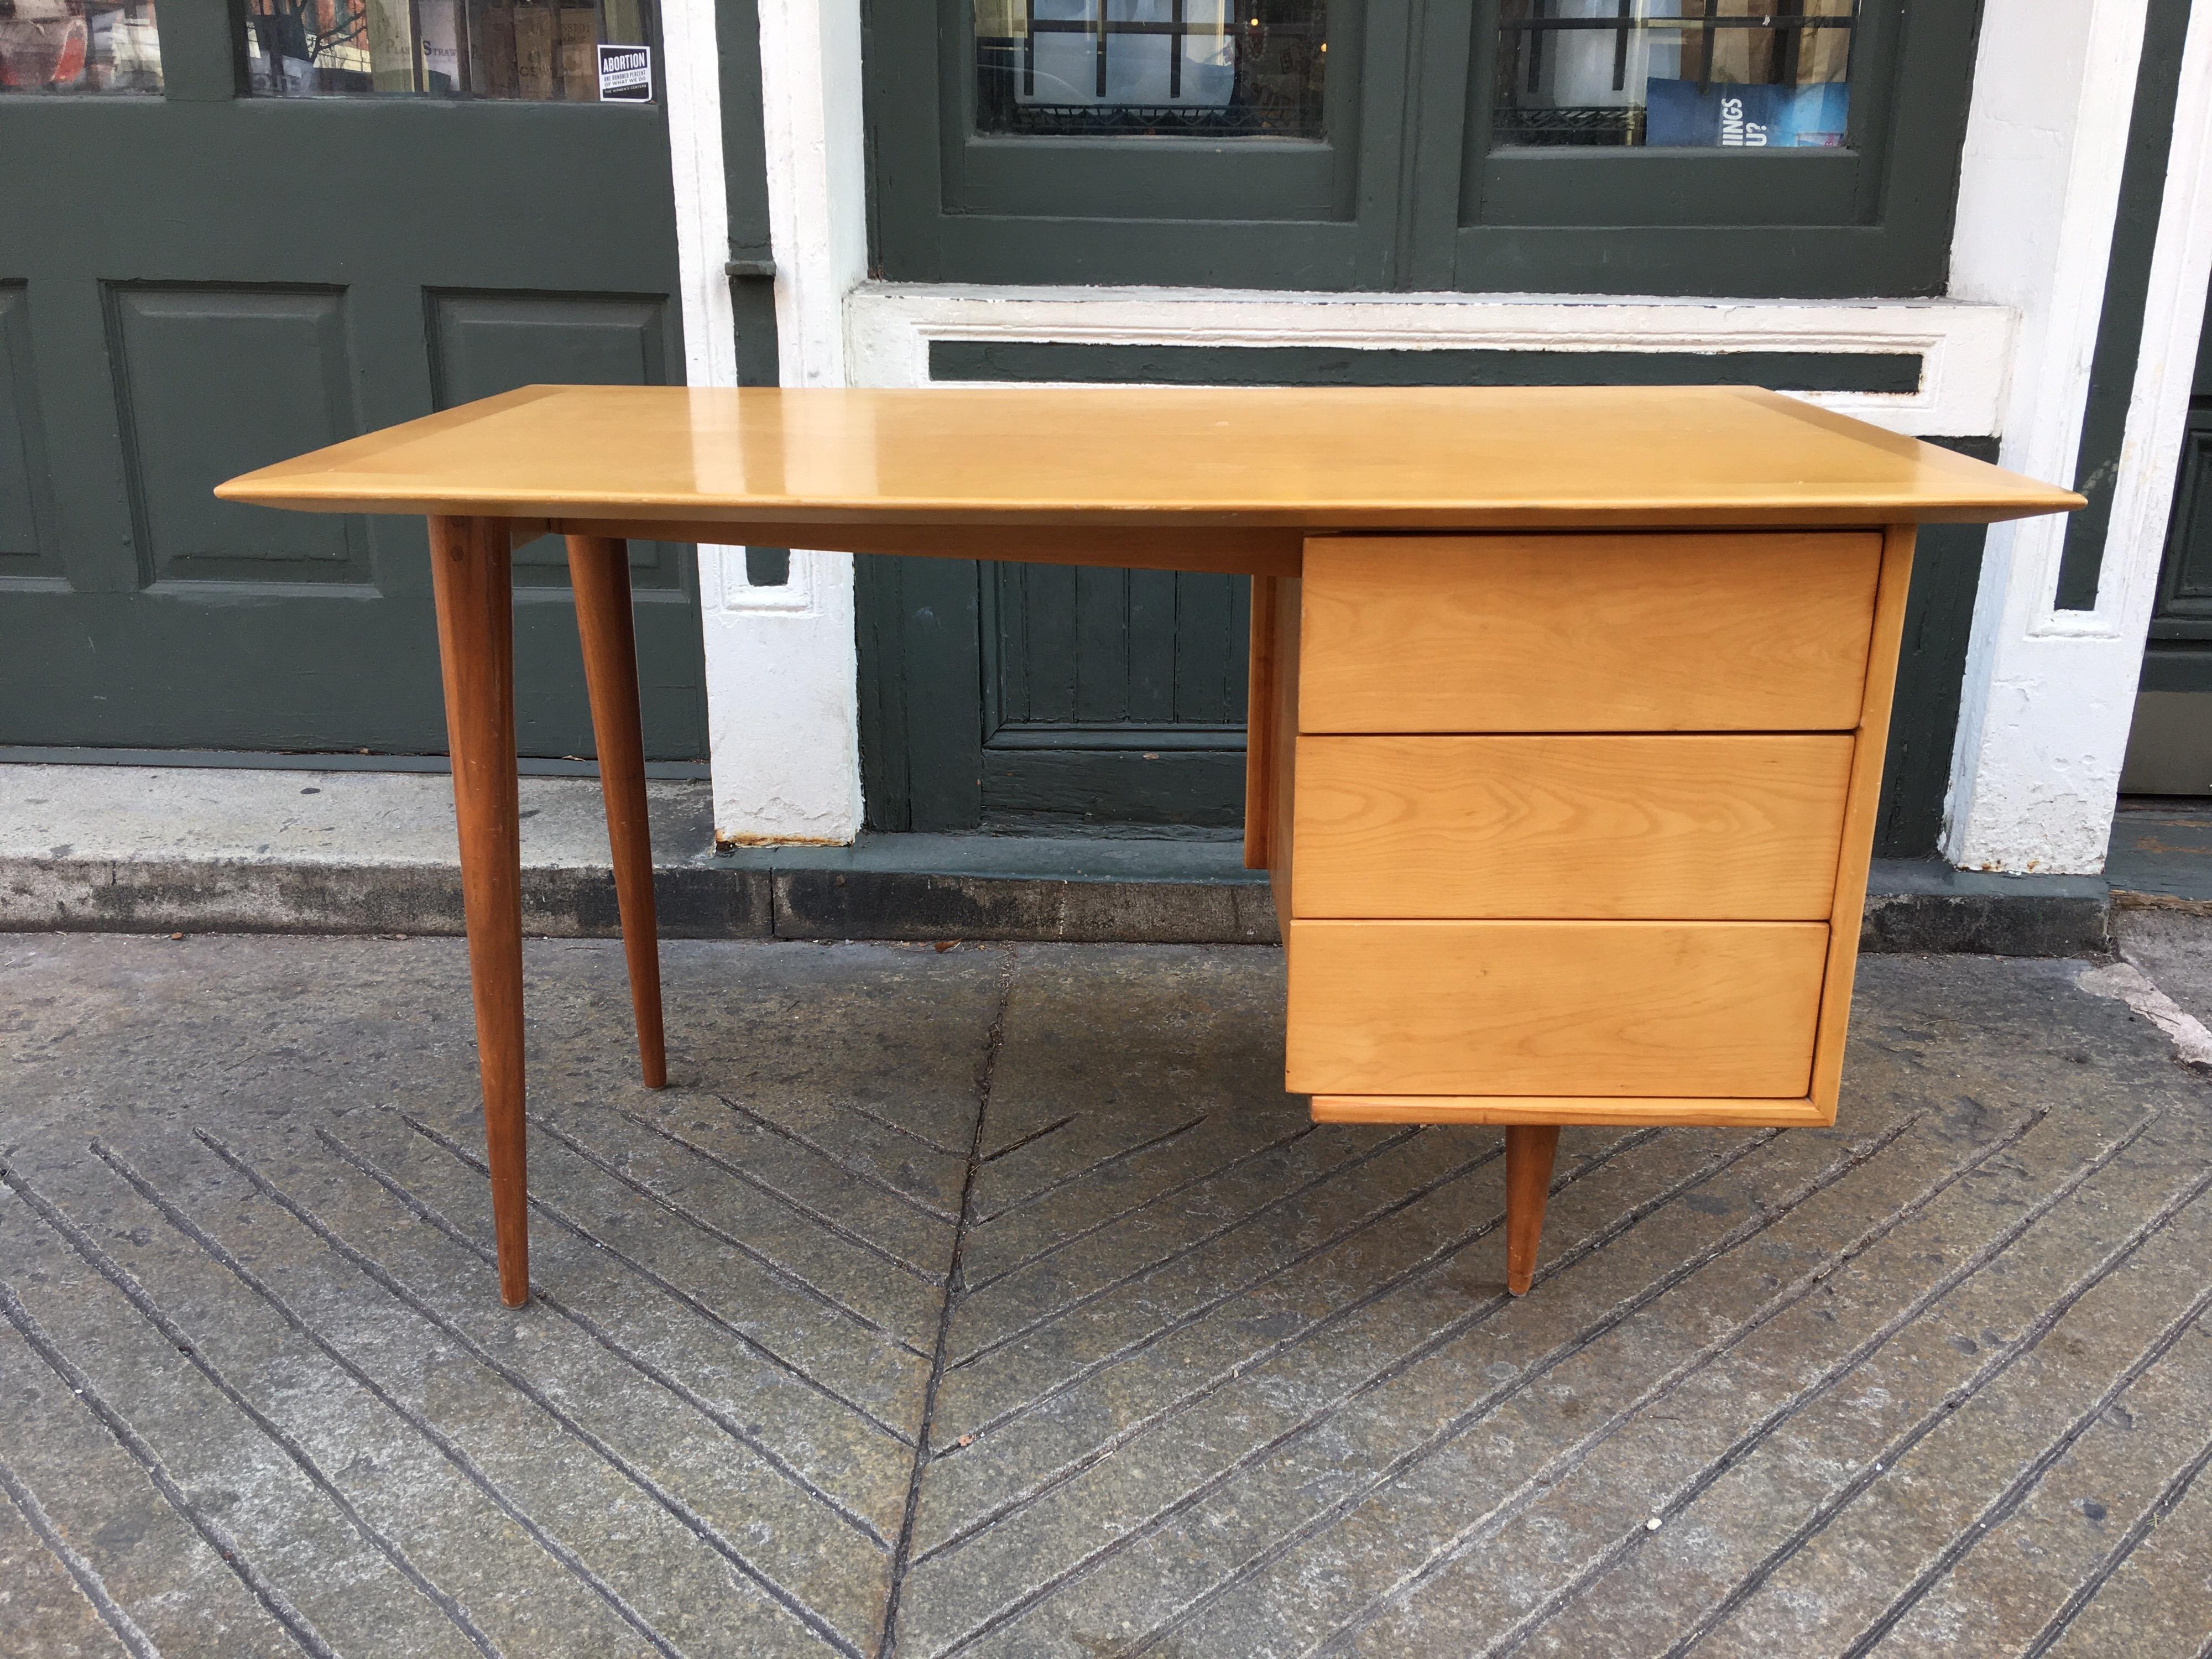 Florence Knoll style birch desk with walnut legs. Three pull out drawers on right side. Desk was refinished maybe 10 years ago and still presents very well. Nice ample work surface!